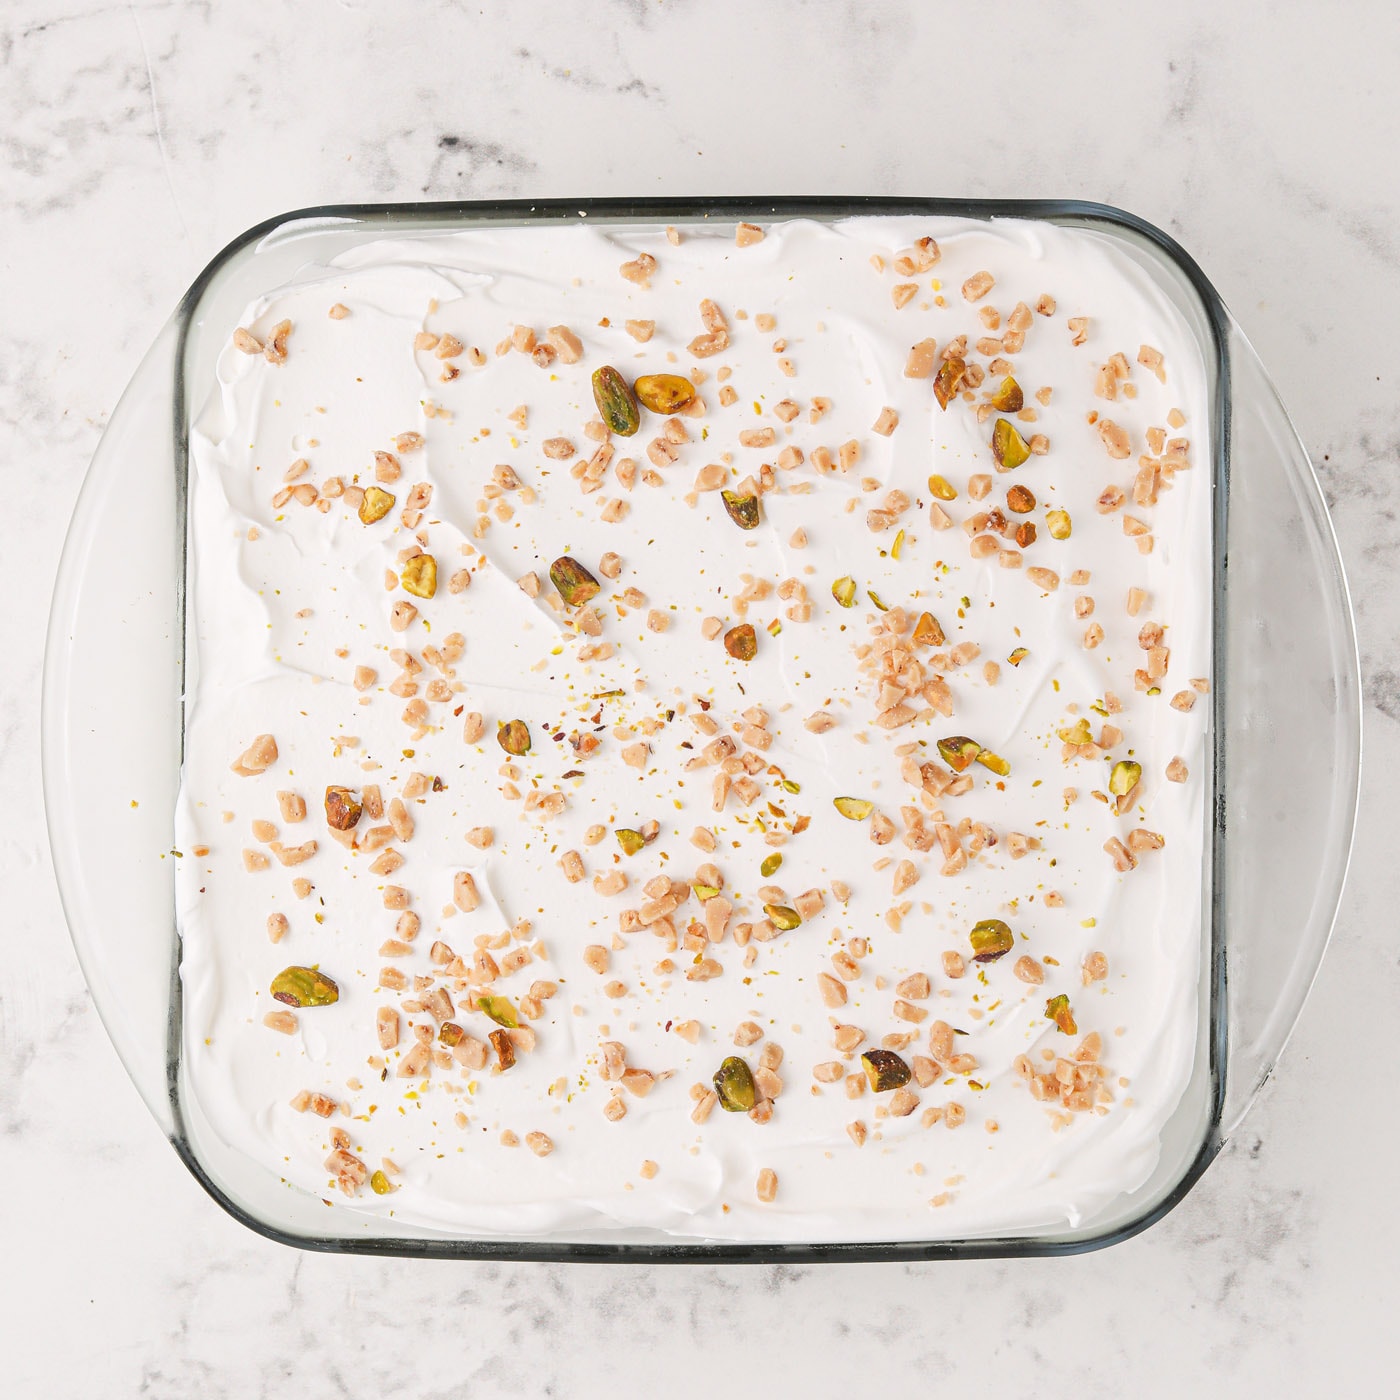 crushed pistachios on top of cool whip and pistachio ice cream